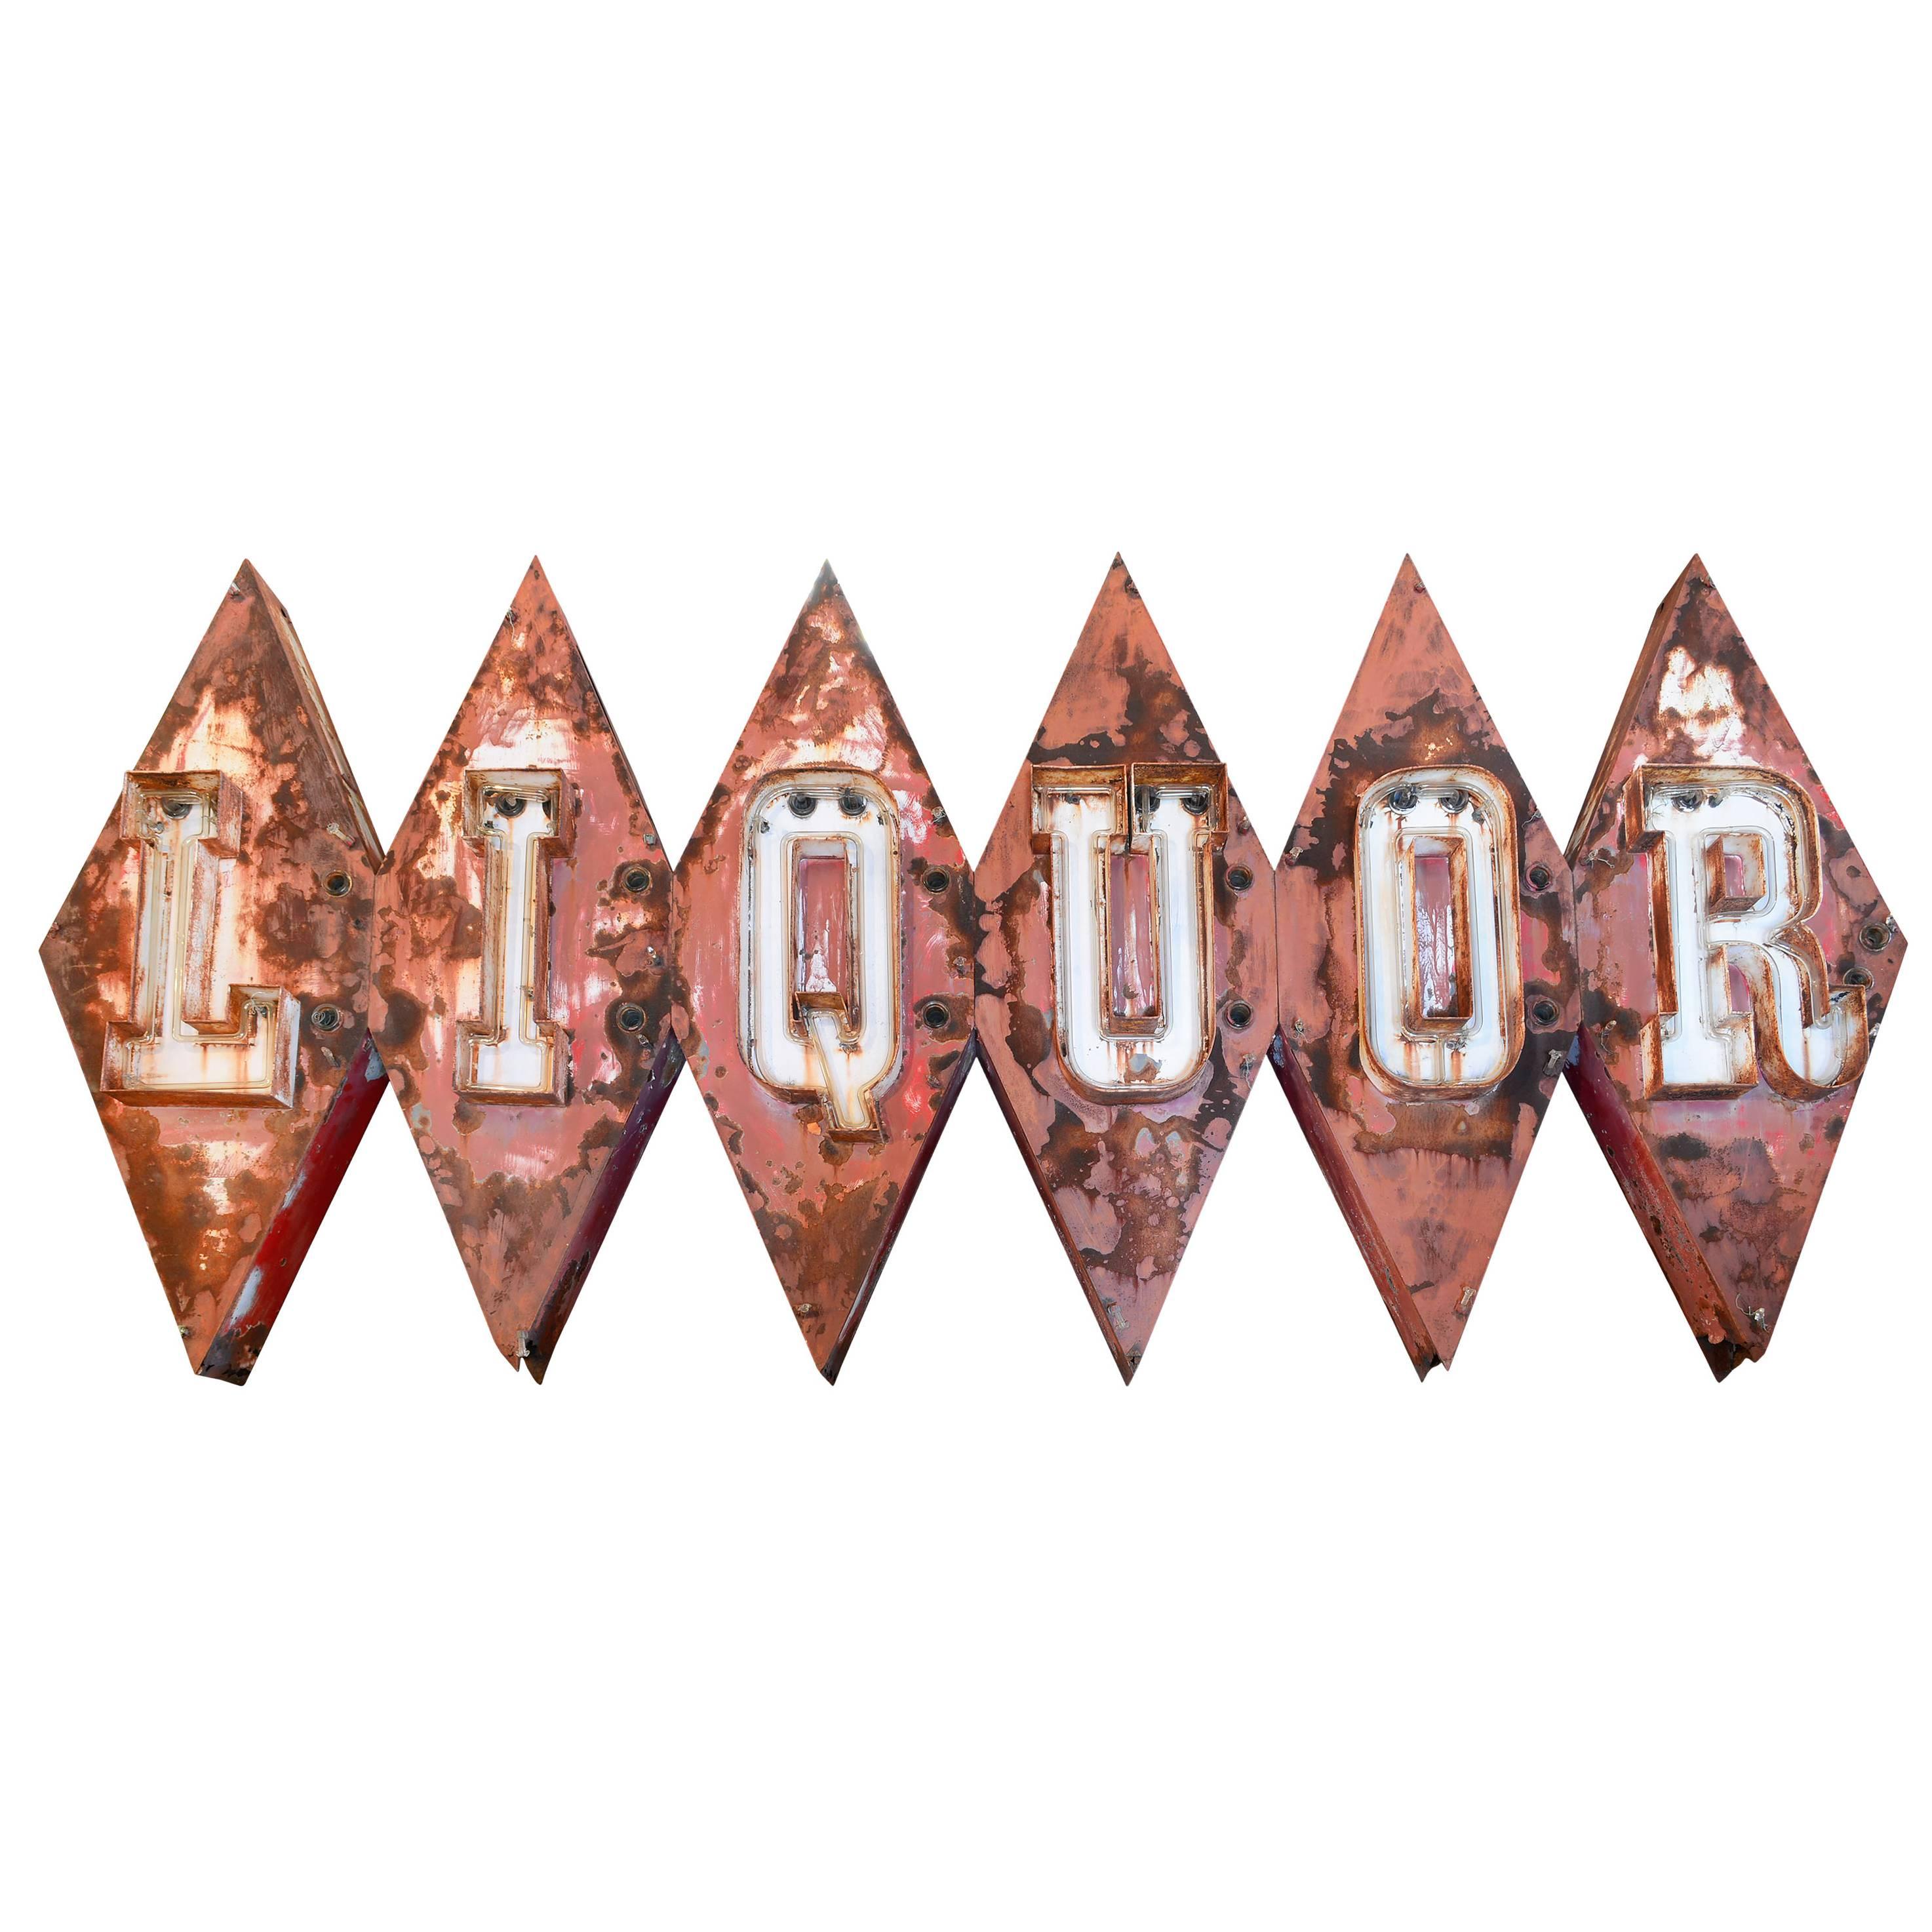 Large Scale 1960s Steel and Neon 'Liquor' Sign, circa 1960